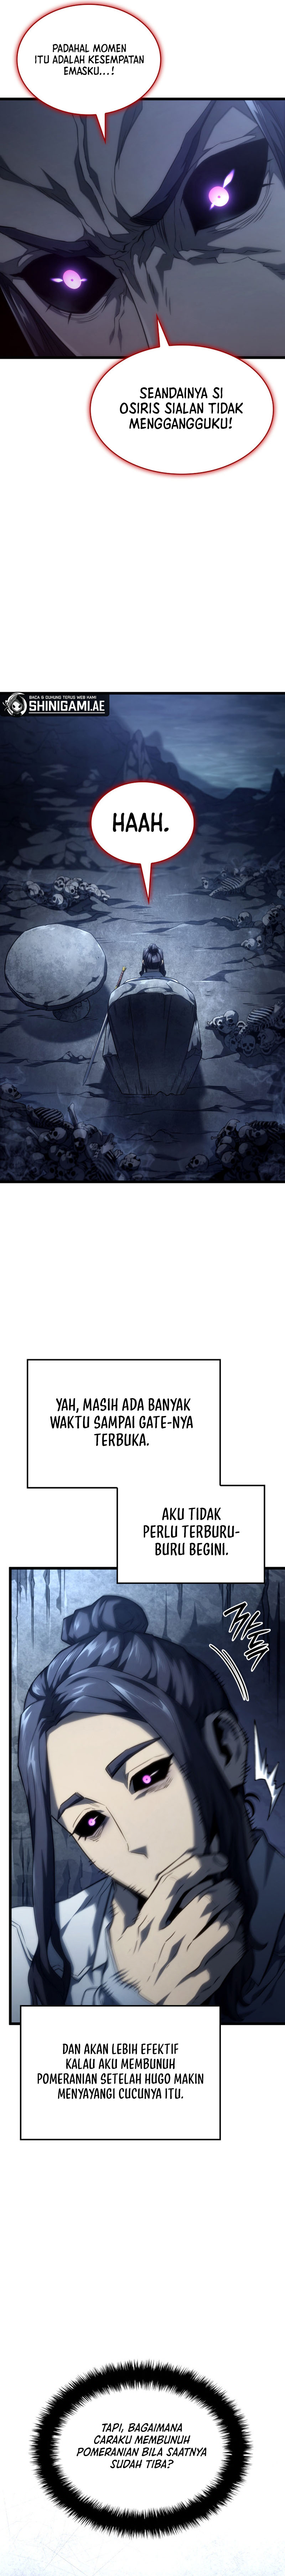 674730705-revenge-of-the-iron-blooded-sword-hound Chapter 70